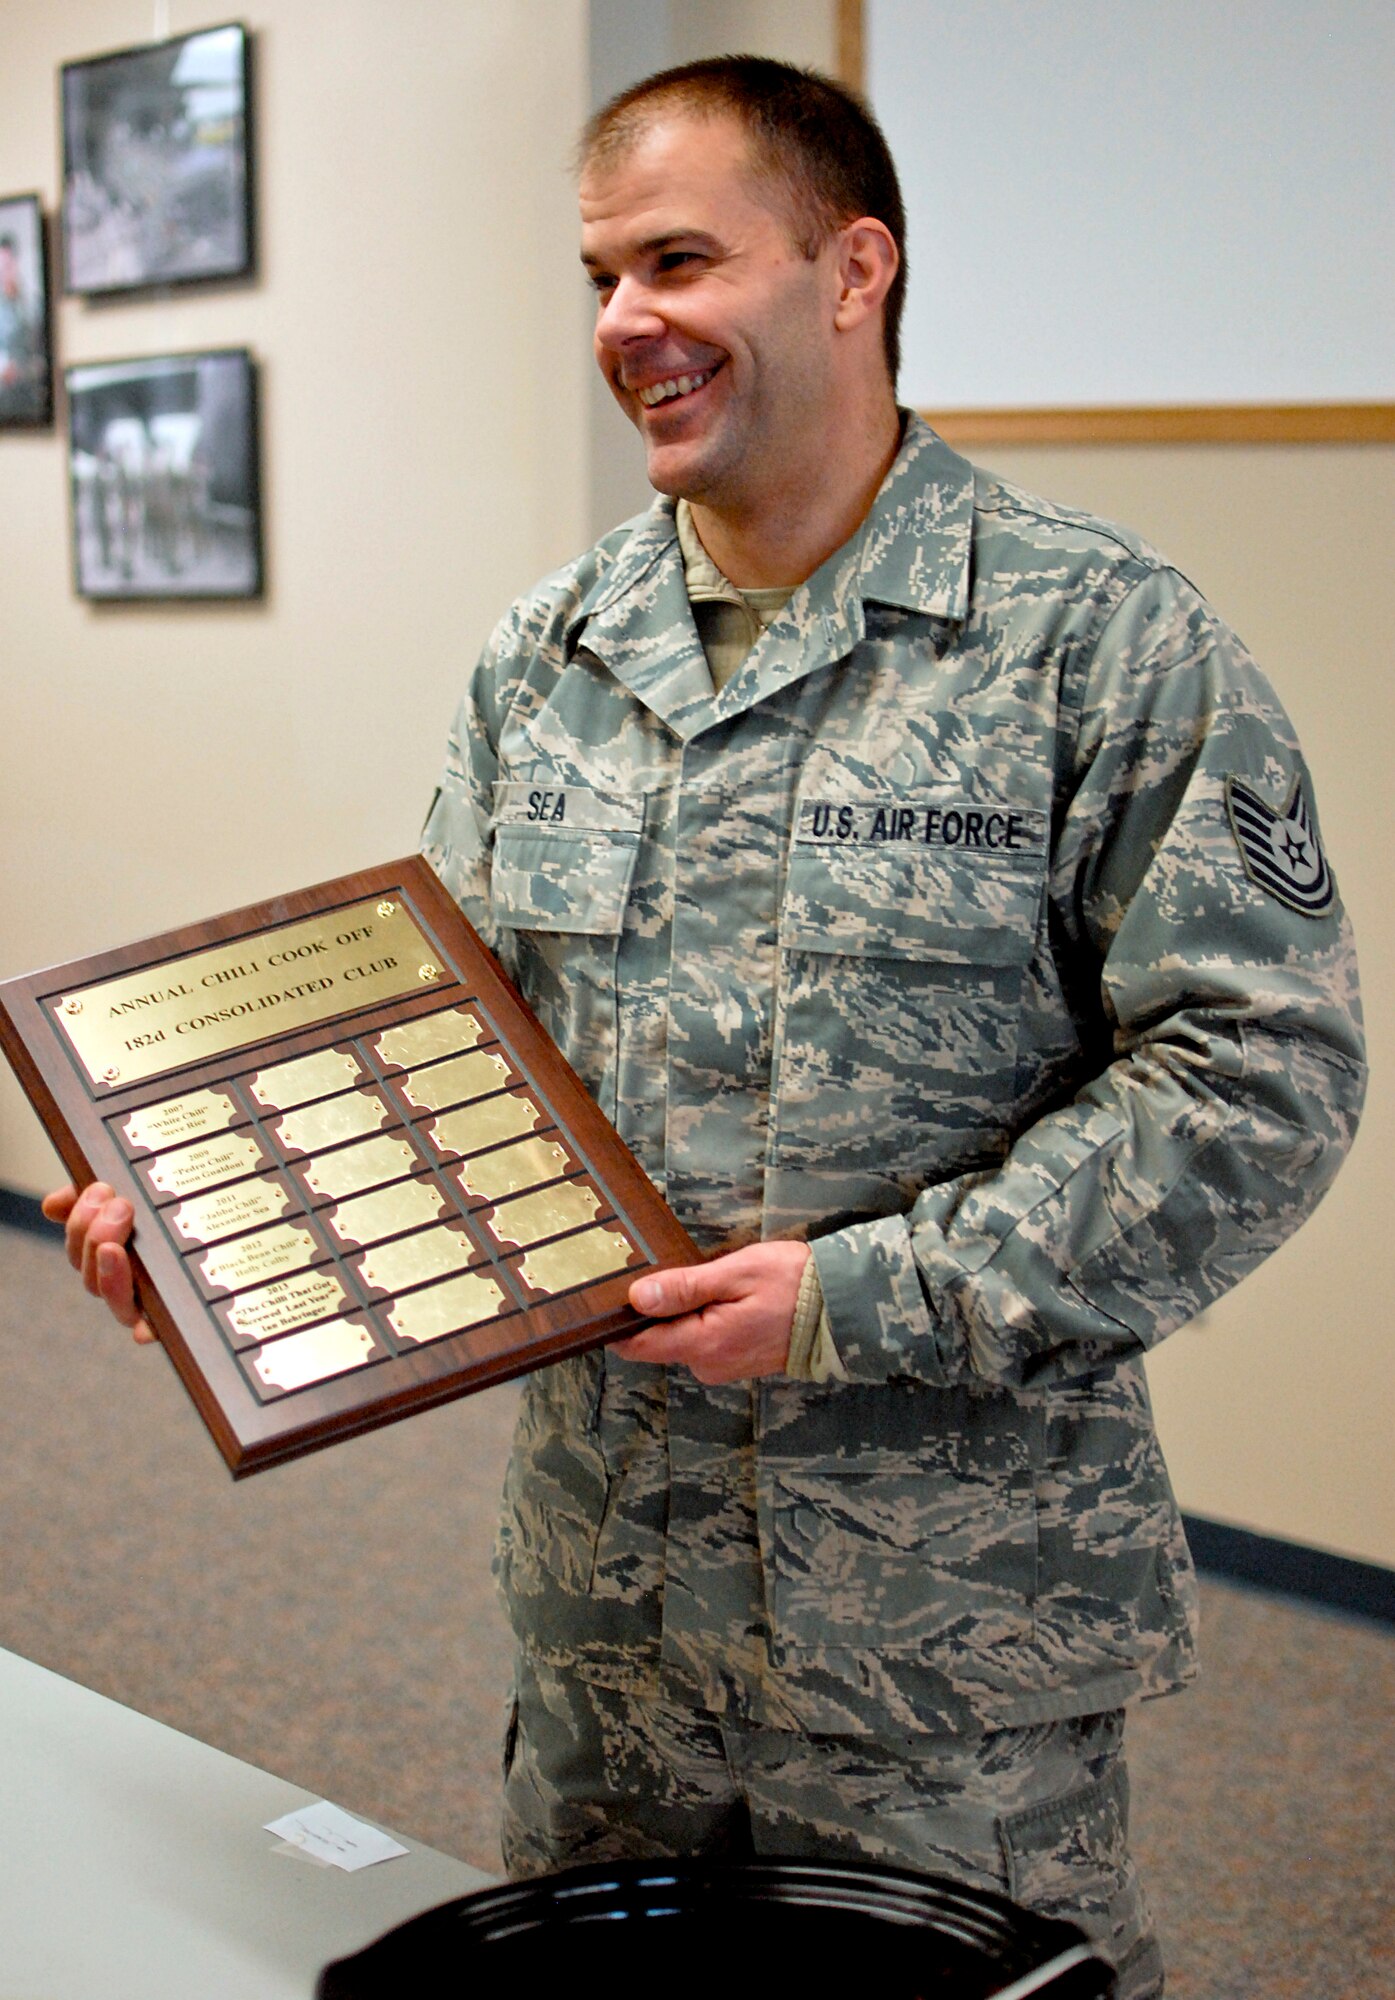 U.S. Air Force Tech. Sgt. Alex R. Sea, vehicle equipment maintenance specialist with the 182nd Logistics Readiness Squadron, displays the plaque of winners after the sixth-annual chili cook off at the 182nd Airlift Wing, Peoria, Ill., Jan. 8, 2014. The competition placed 13 contestants and their homemade chili recipes against each other to compete for best look and smell, best consistency, and best taste. Sea won in both the best consistency and most overall points categories for his Jabbo Chili recipe. He was awarded a five-year membership to the wing’s consolidated club and had his name added to the winners’ plaque. The event brought out approximately 120 unit members to sample the various white and traditional red entries, and raised $490 in support of operating the wing’s consolidated club. Sea enjoys the yearly event because he gets to have good chili with good people, he said. “It’s a good way to get out and mingle and talk to the people you don’t usually see on a day-to-day basis.” (U.S. Air National Guard photo by Staff Sgt. Lealan Buehrer/Released. Image was cropped to emphasize subject.)